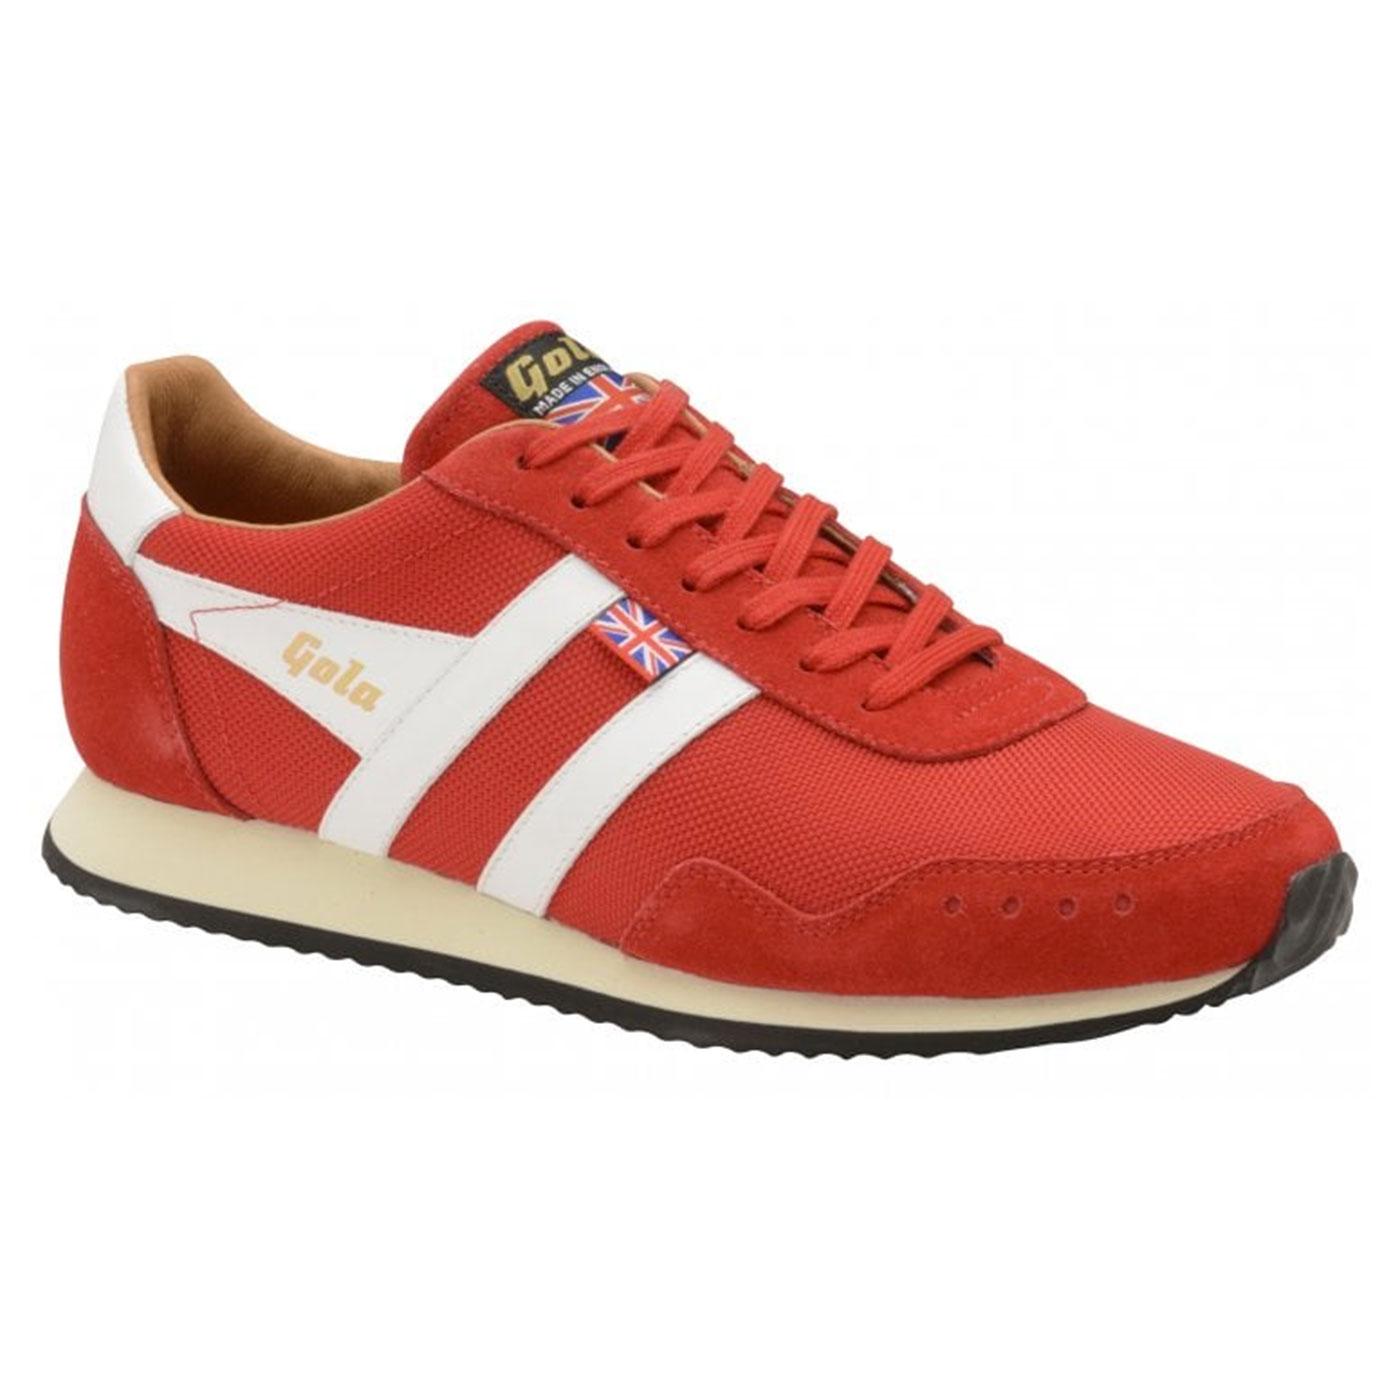 Track Mesh GOLA Made in England Retro Trainers RED